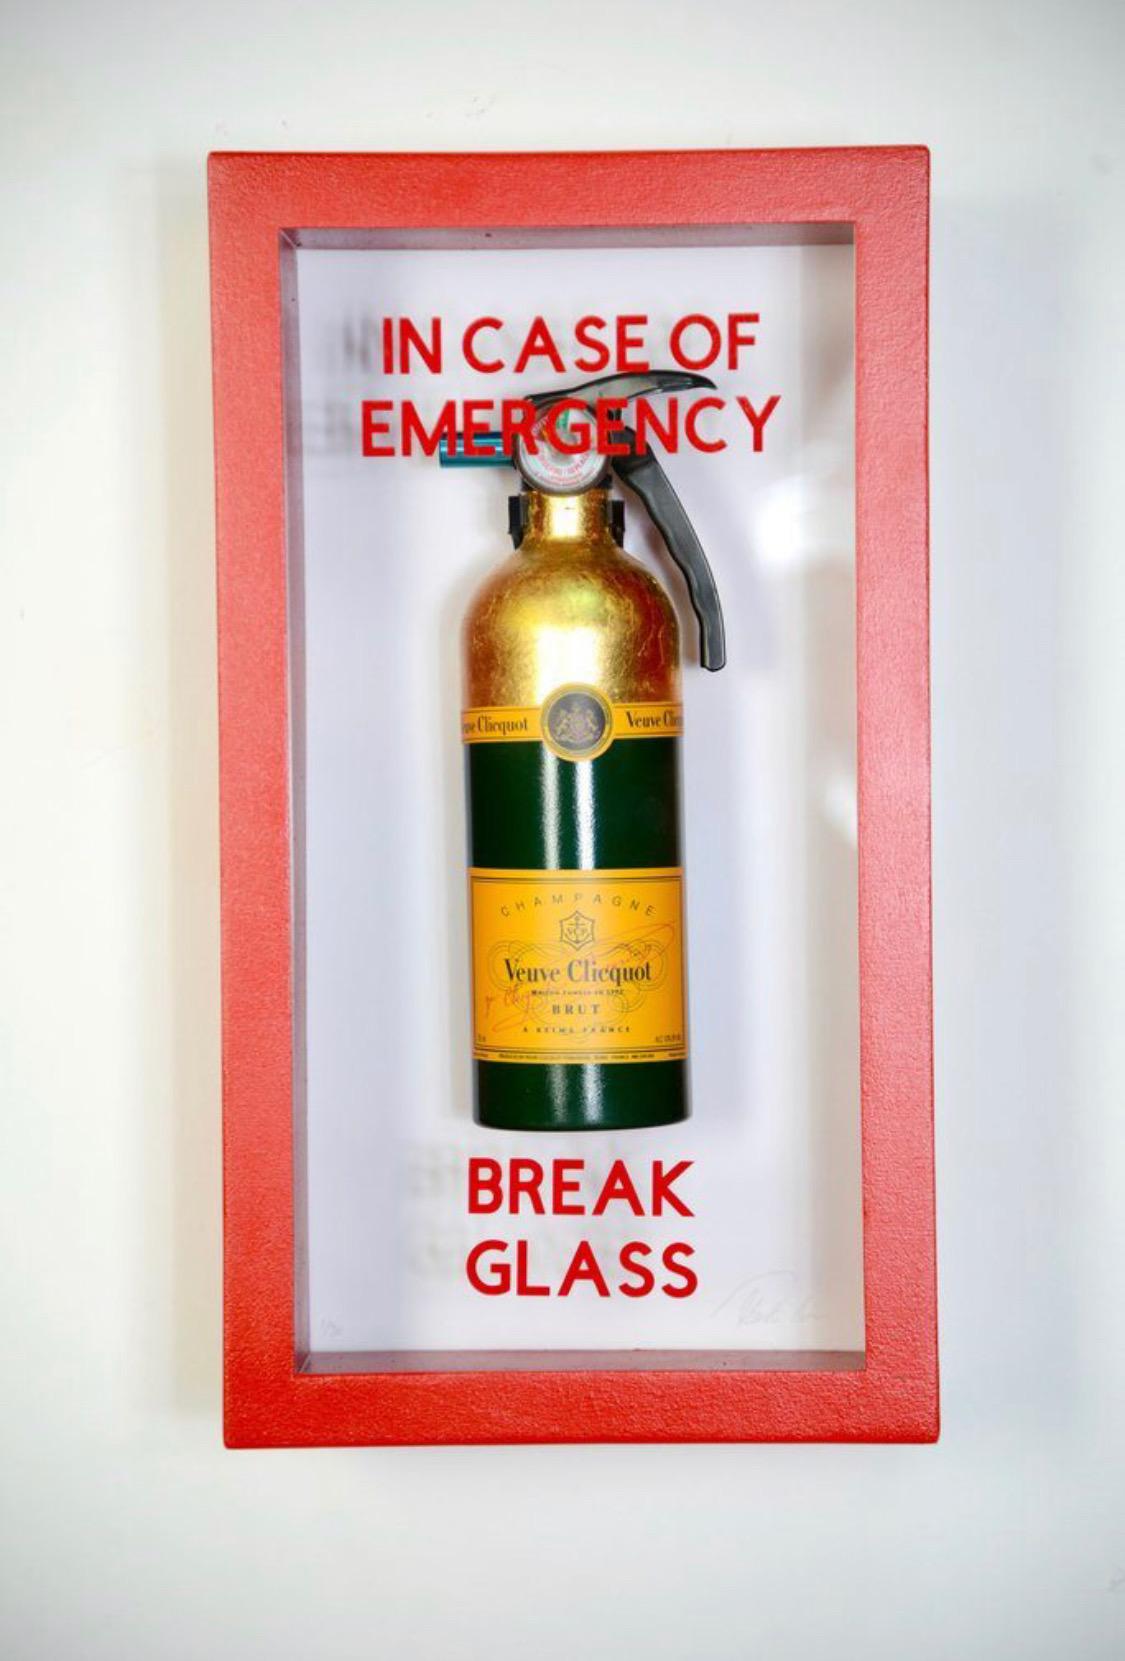 "In Case Of Emergency - Compact Vueve Fire Extinguisher" - Mixed Media Art by Plastic Jesus